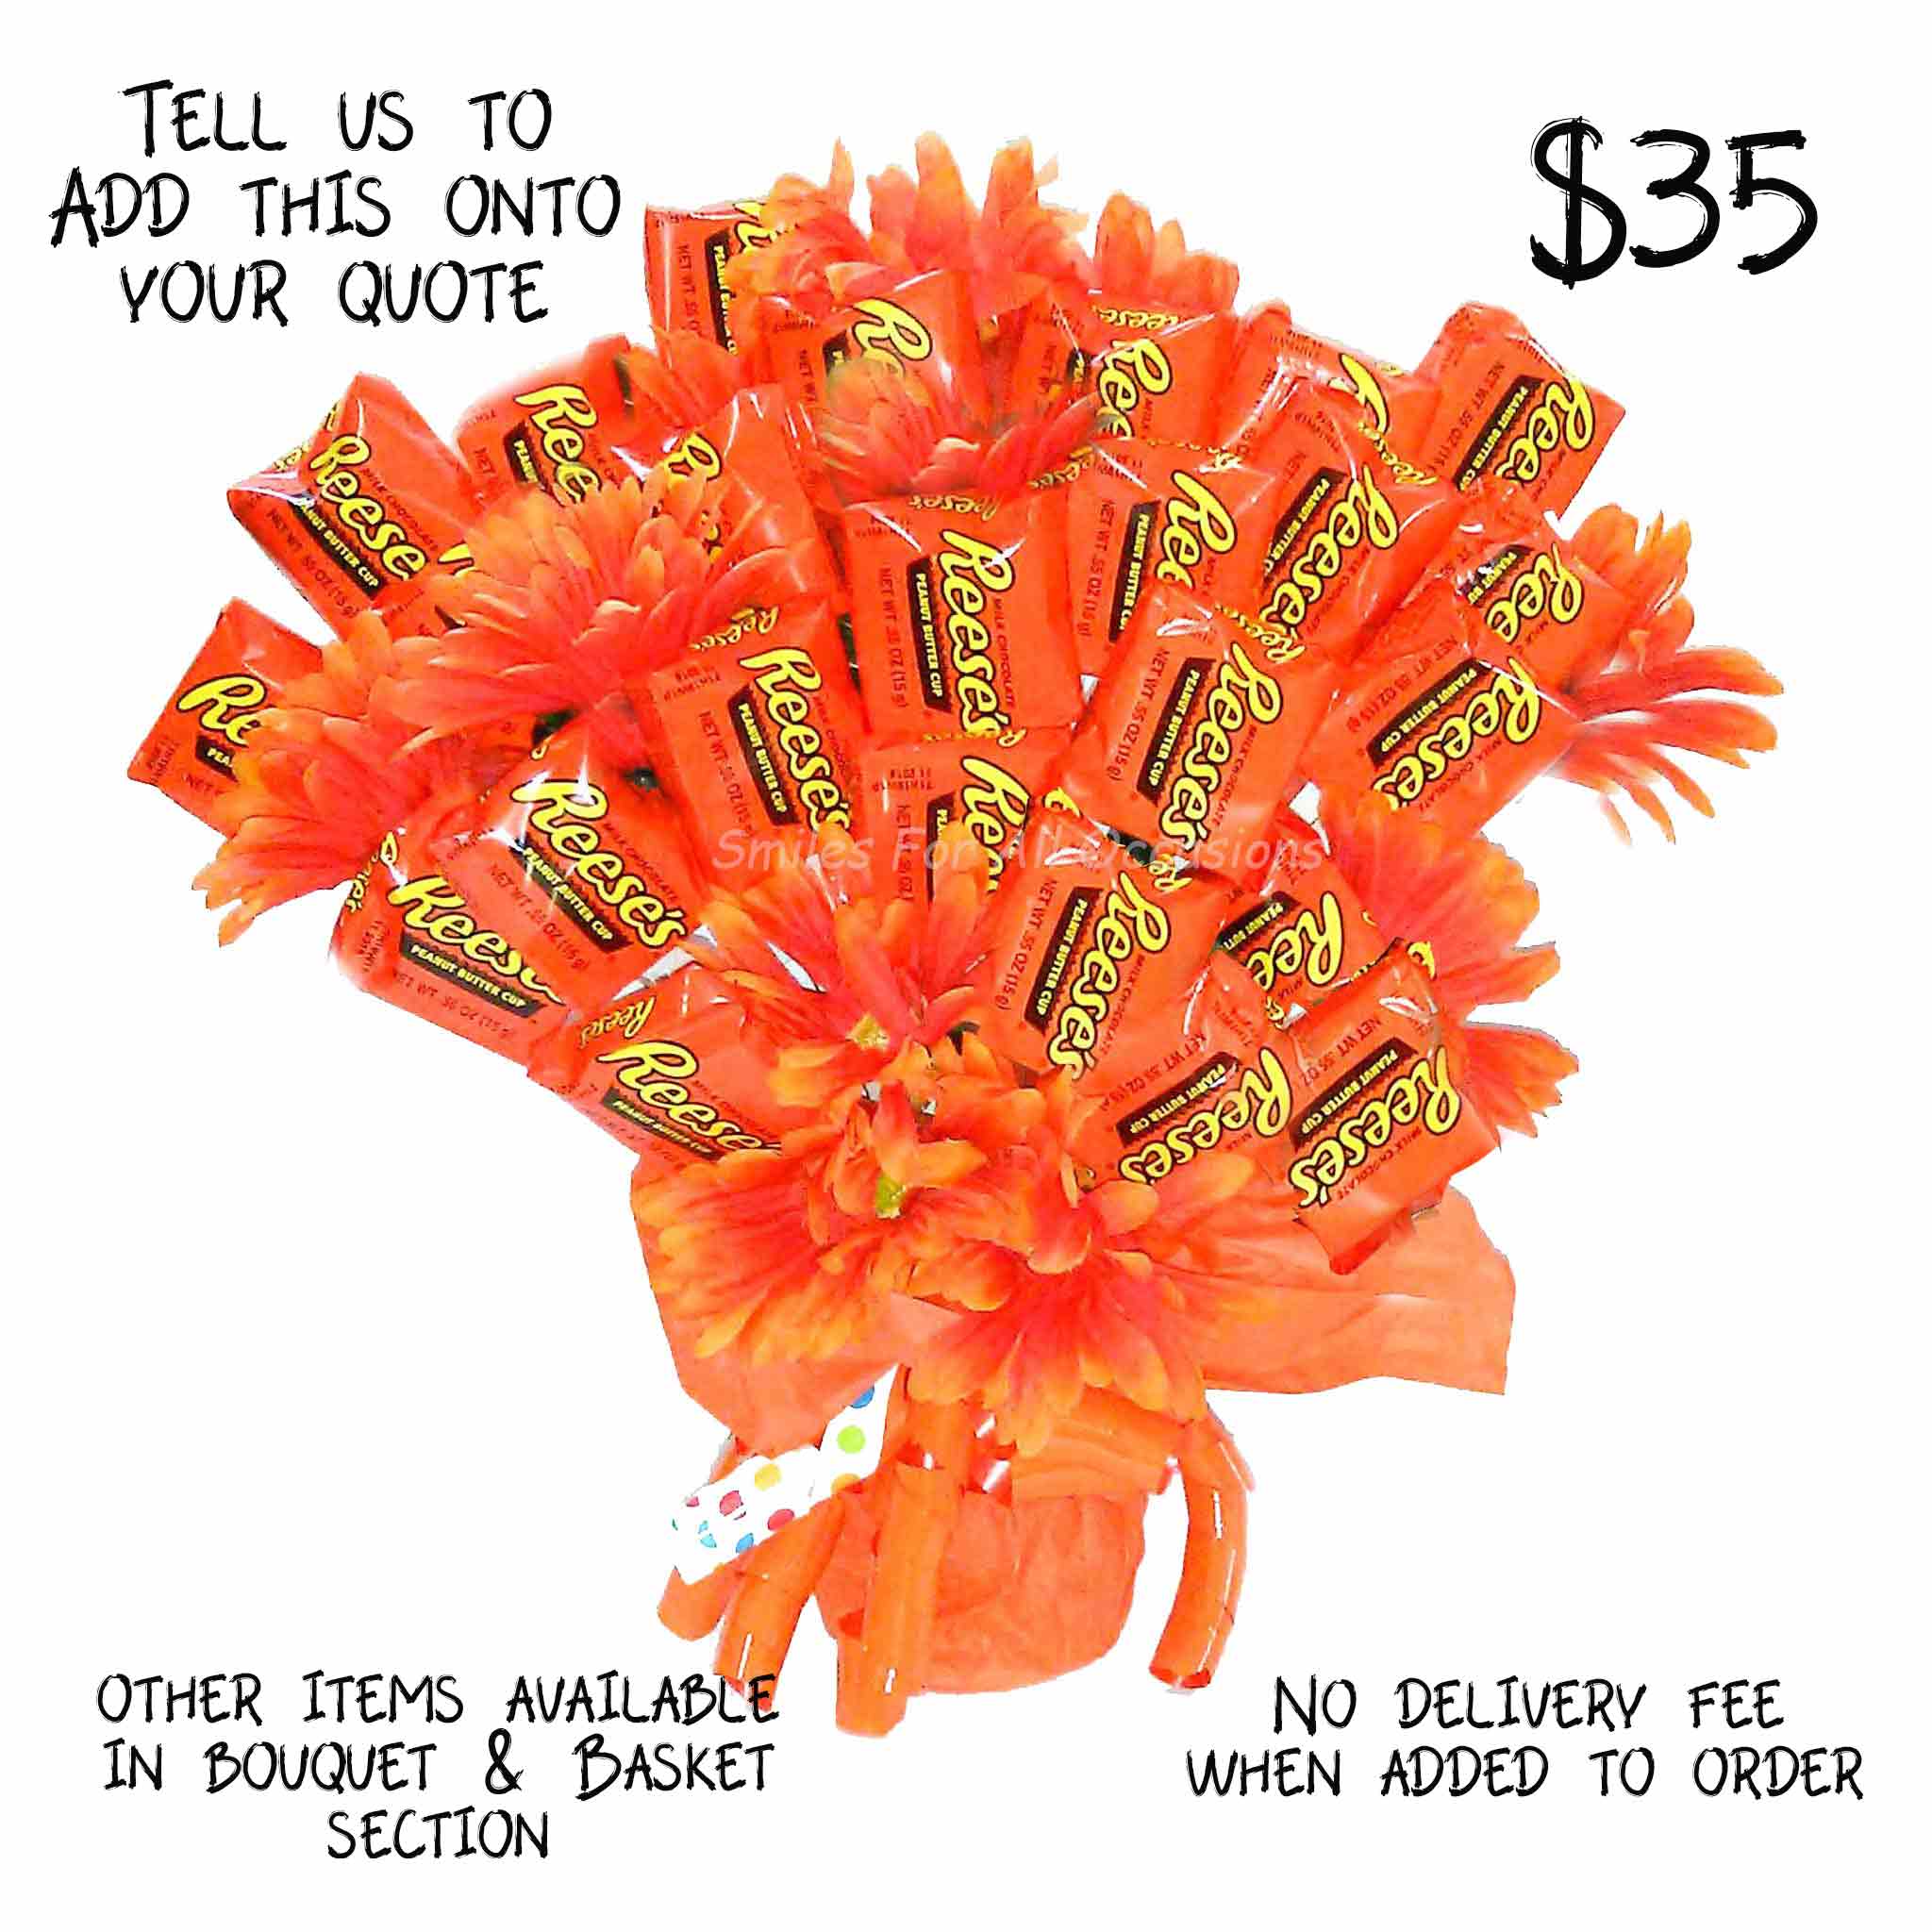 Reese's Candy Bouquet, Orange Candy Wrappers